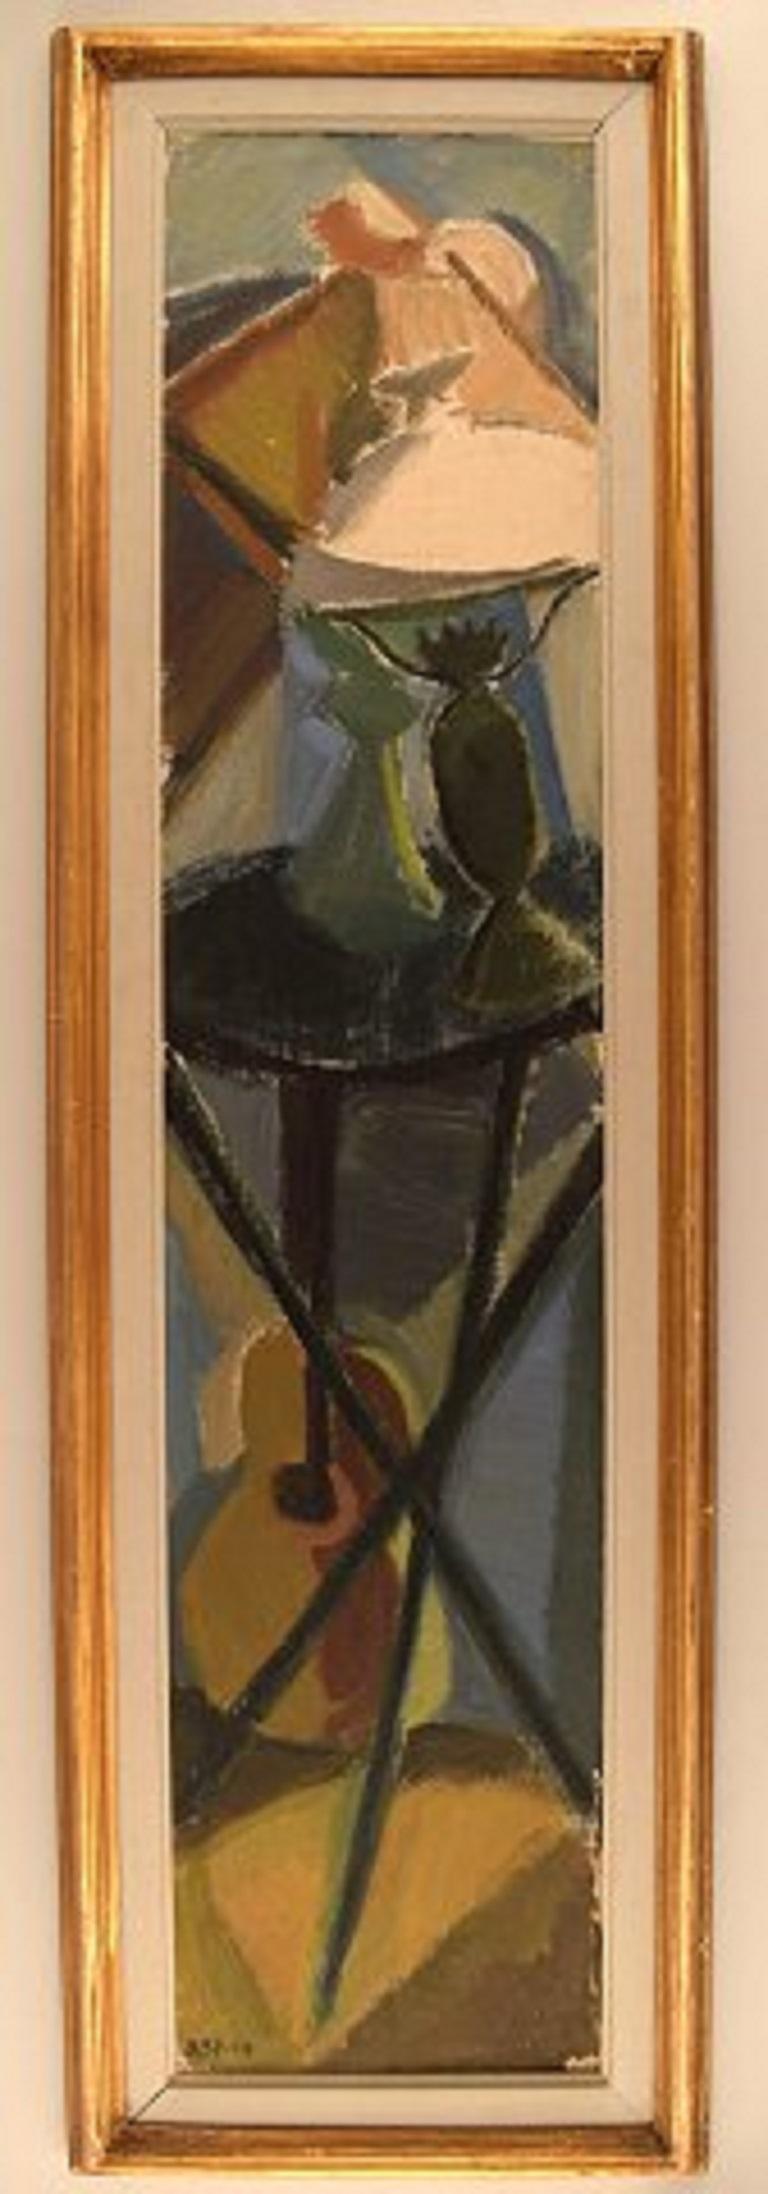 Gösta Asp (1910-1986), Swedish artist. Oil on board. Set up with side table, guitar and lamp. Dated 1954.
The board measures: 93 x 20 cm.
The frame measures: 5.5 cm.
Signed and dated.
In very good condition.
20th century. Scandinavian